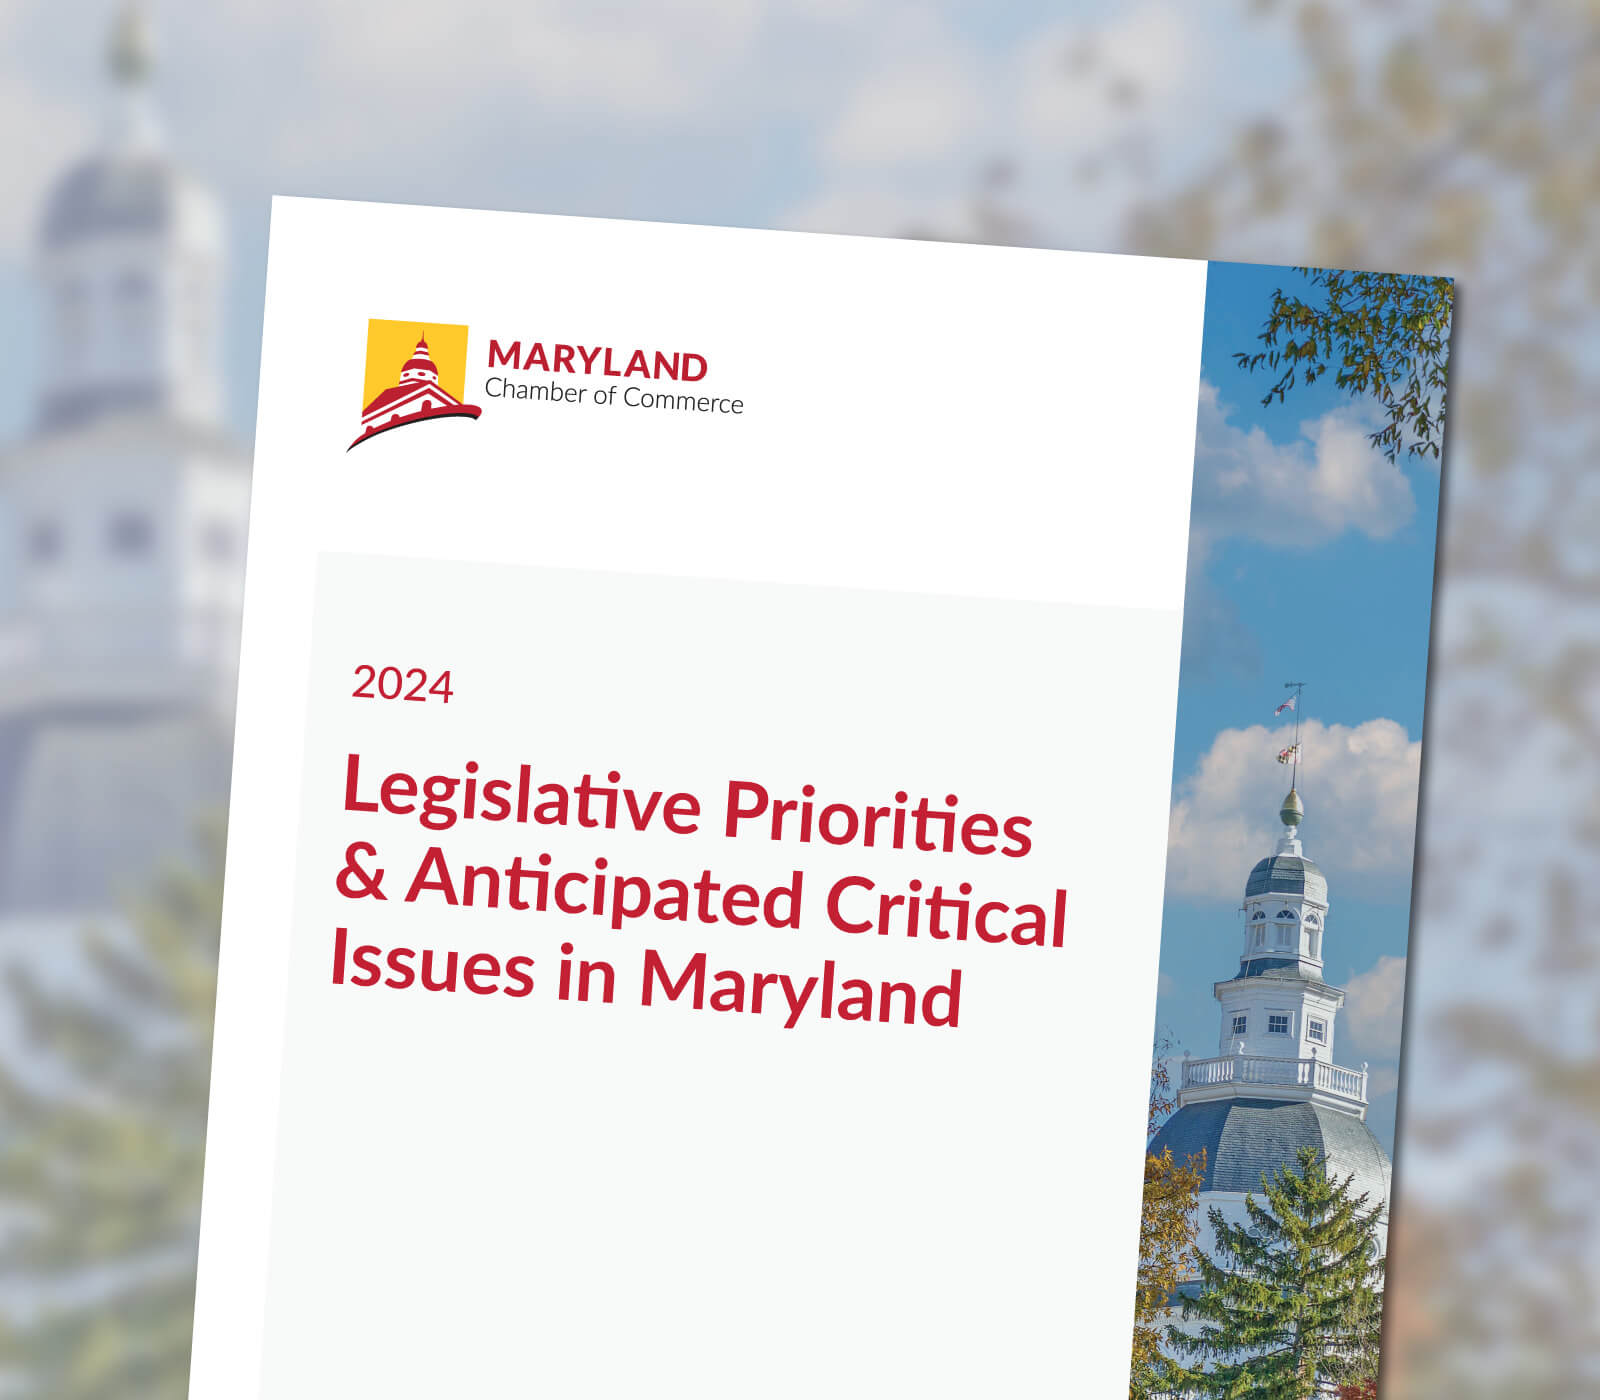 A photo of the Maryland State House, blue skies and trees in the background with a photo of the front cover of the 2024 Legislative Priorities & Anticipated Critical Issues in Maryland. The report details the Maryland Chamber of Commerce's 2024 Legislative Priorities and a number of anticipated issues surrounding policies for business.